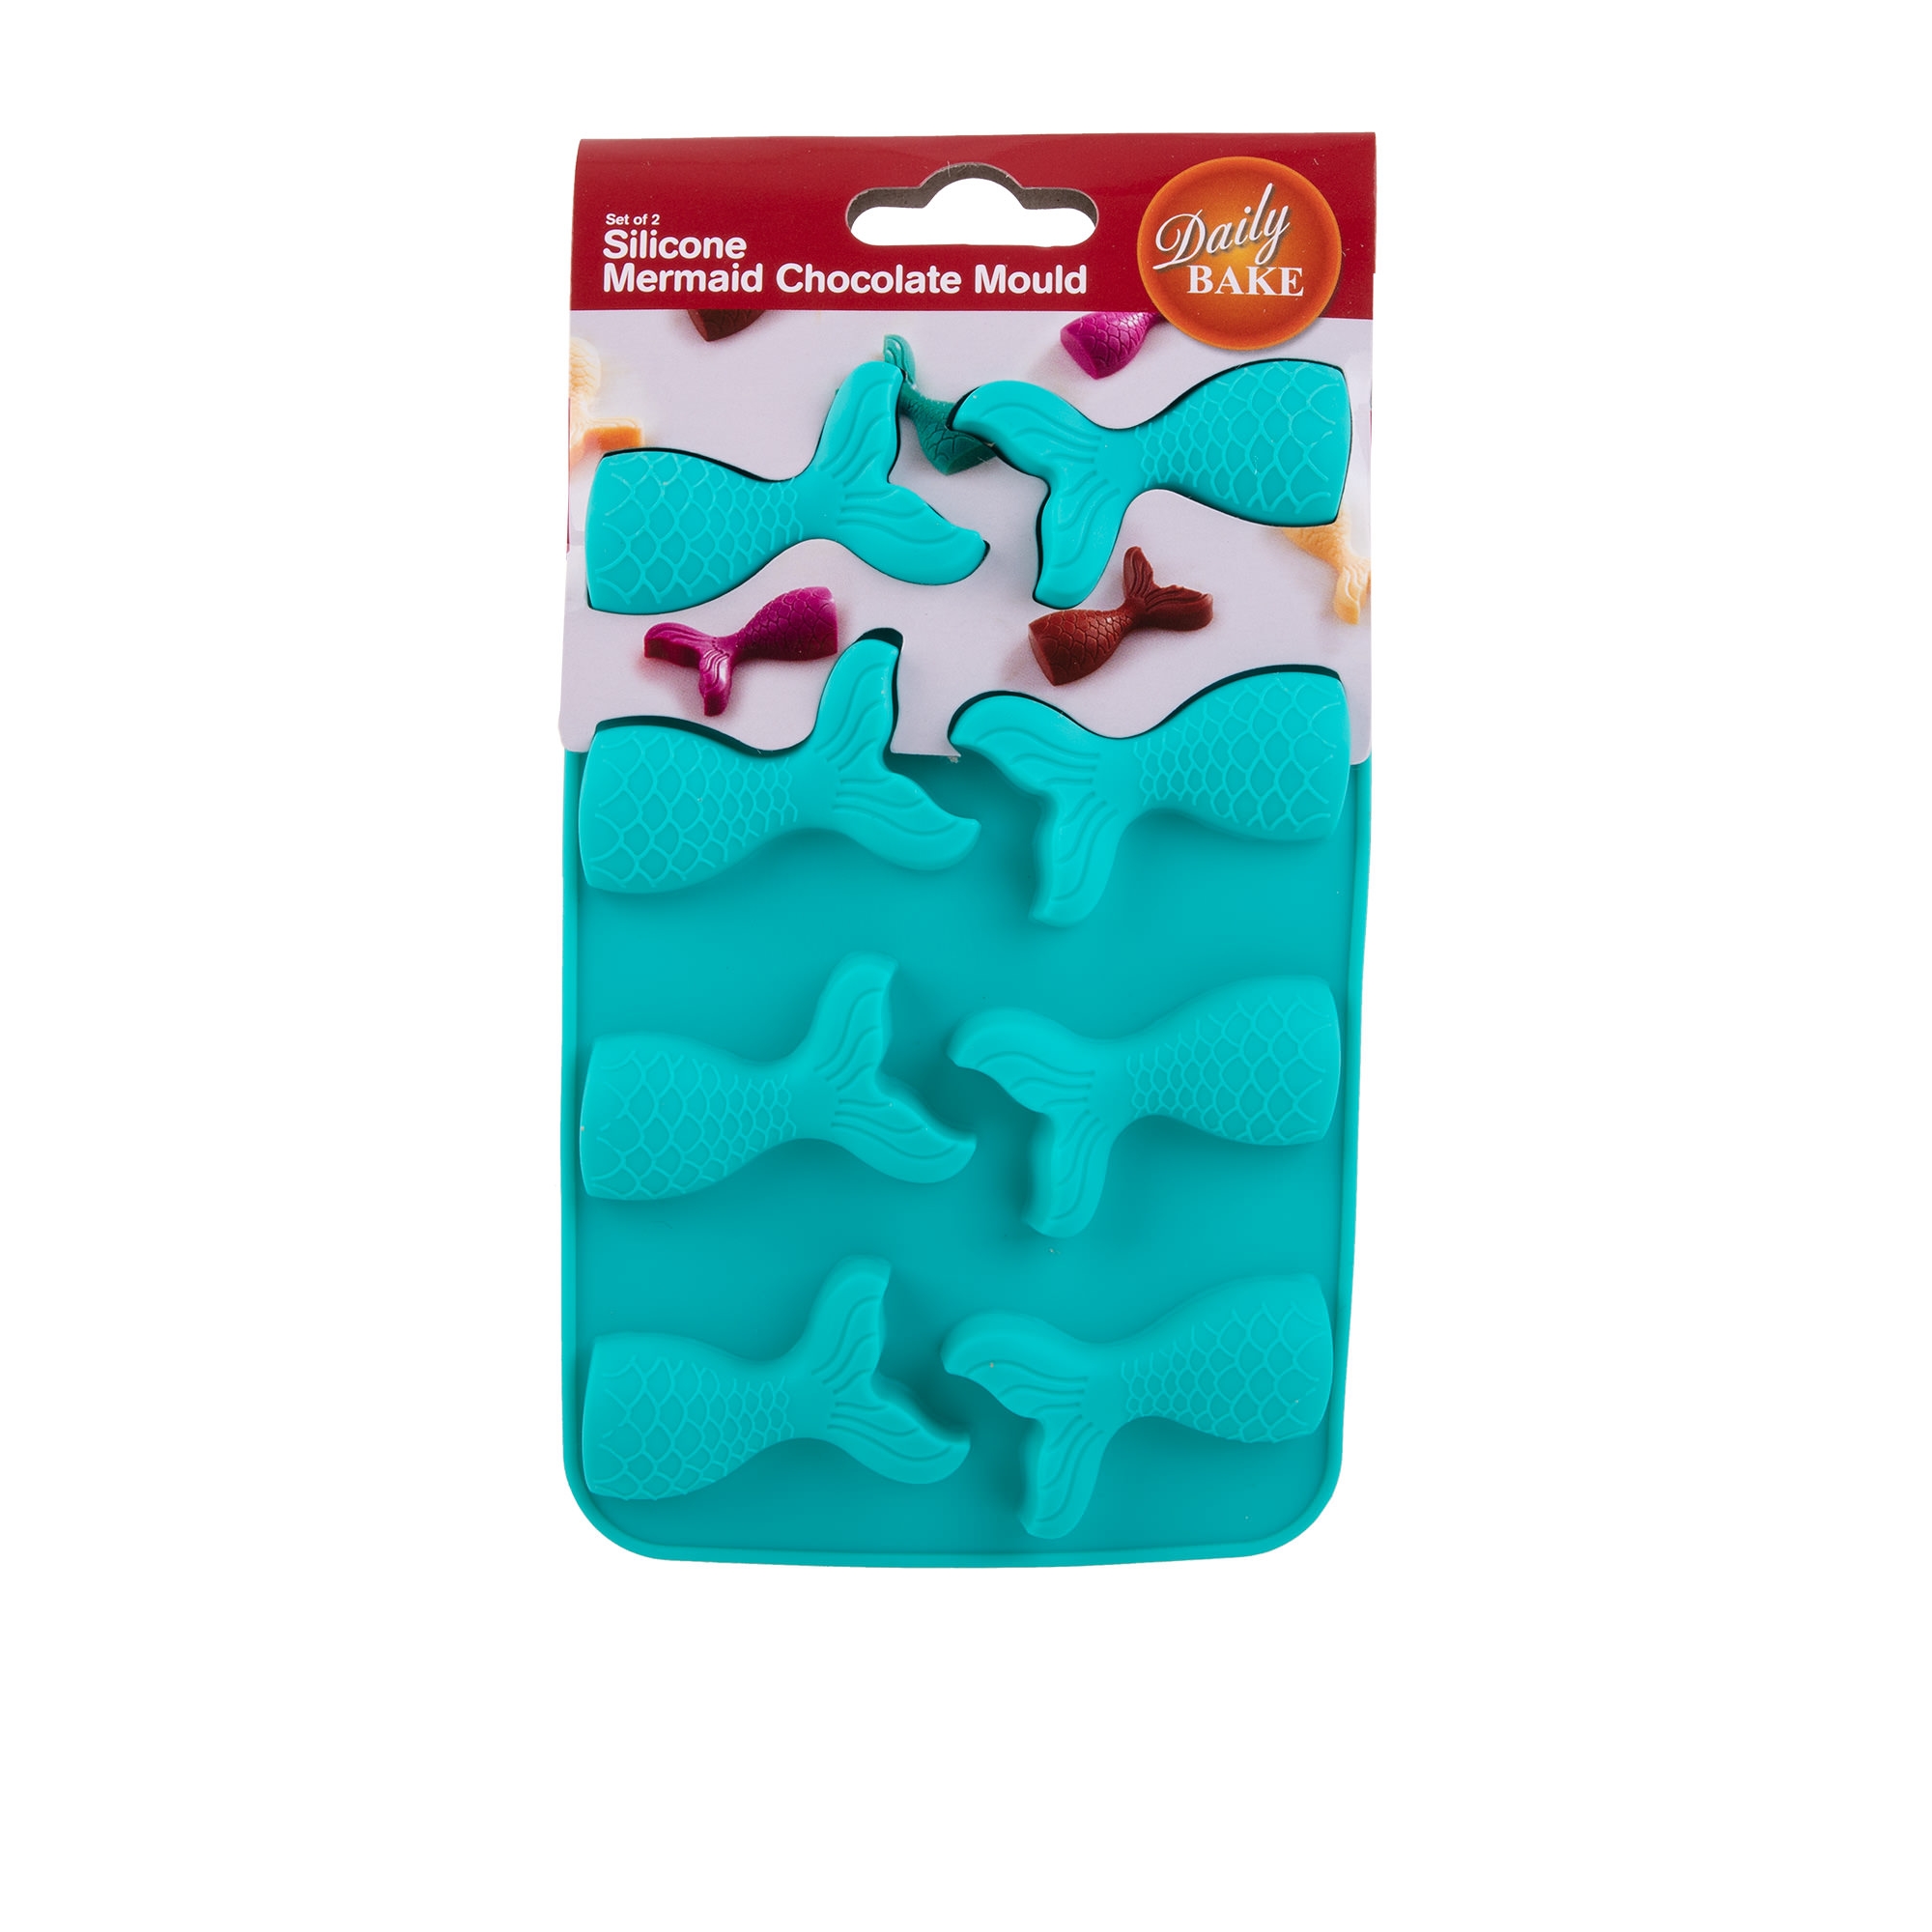 Daily Bake Mermaid 8 Cup Chocolate Mould Set 2pc Turquoise Image 2